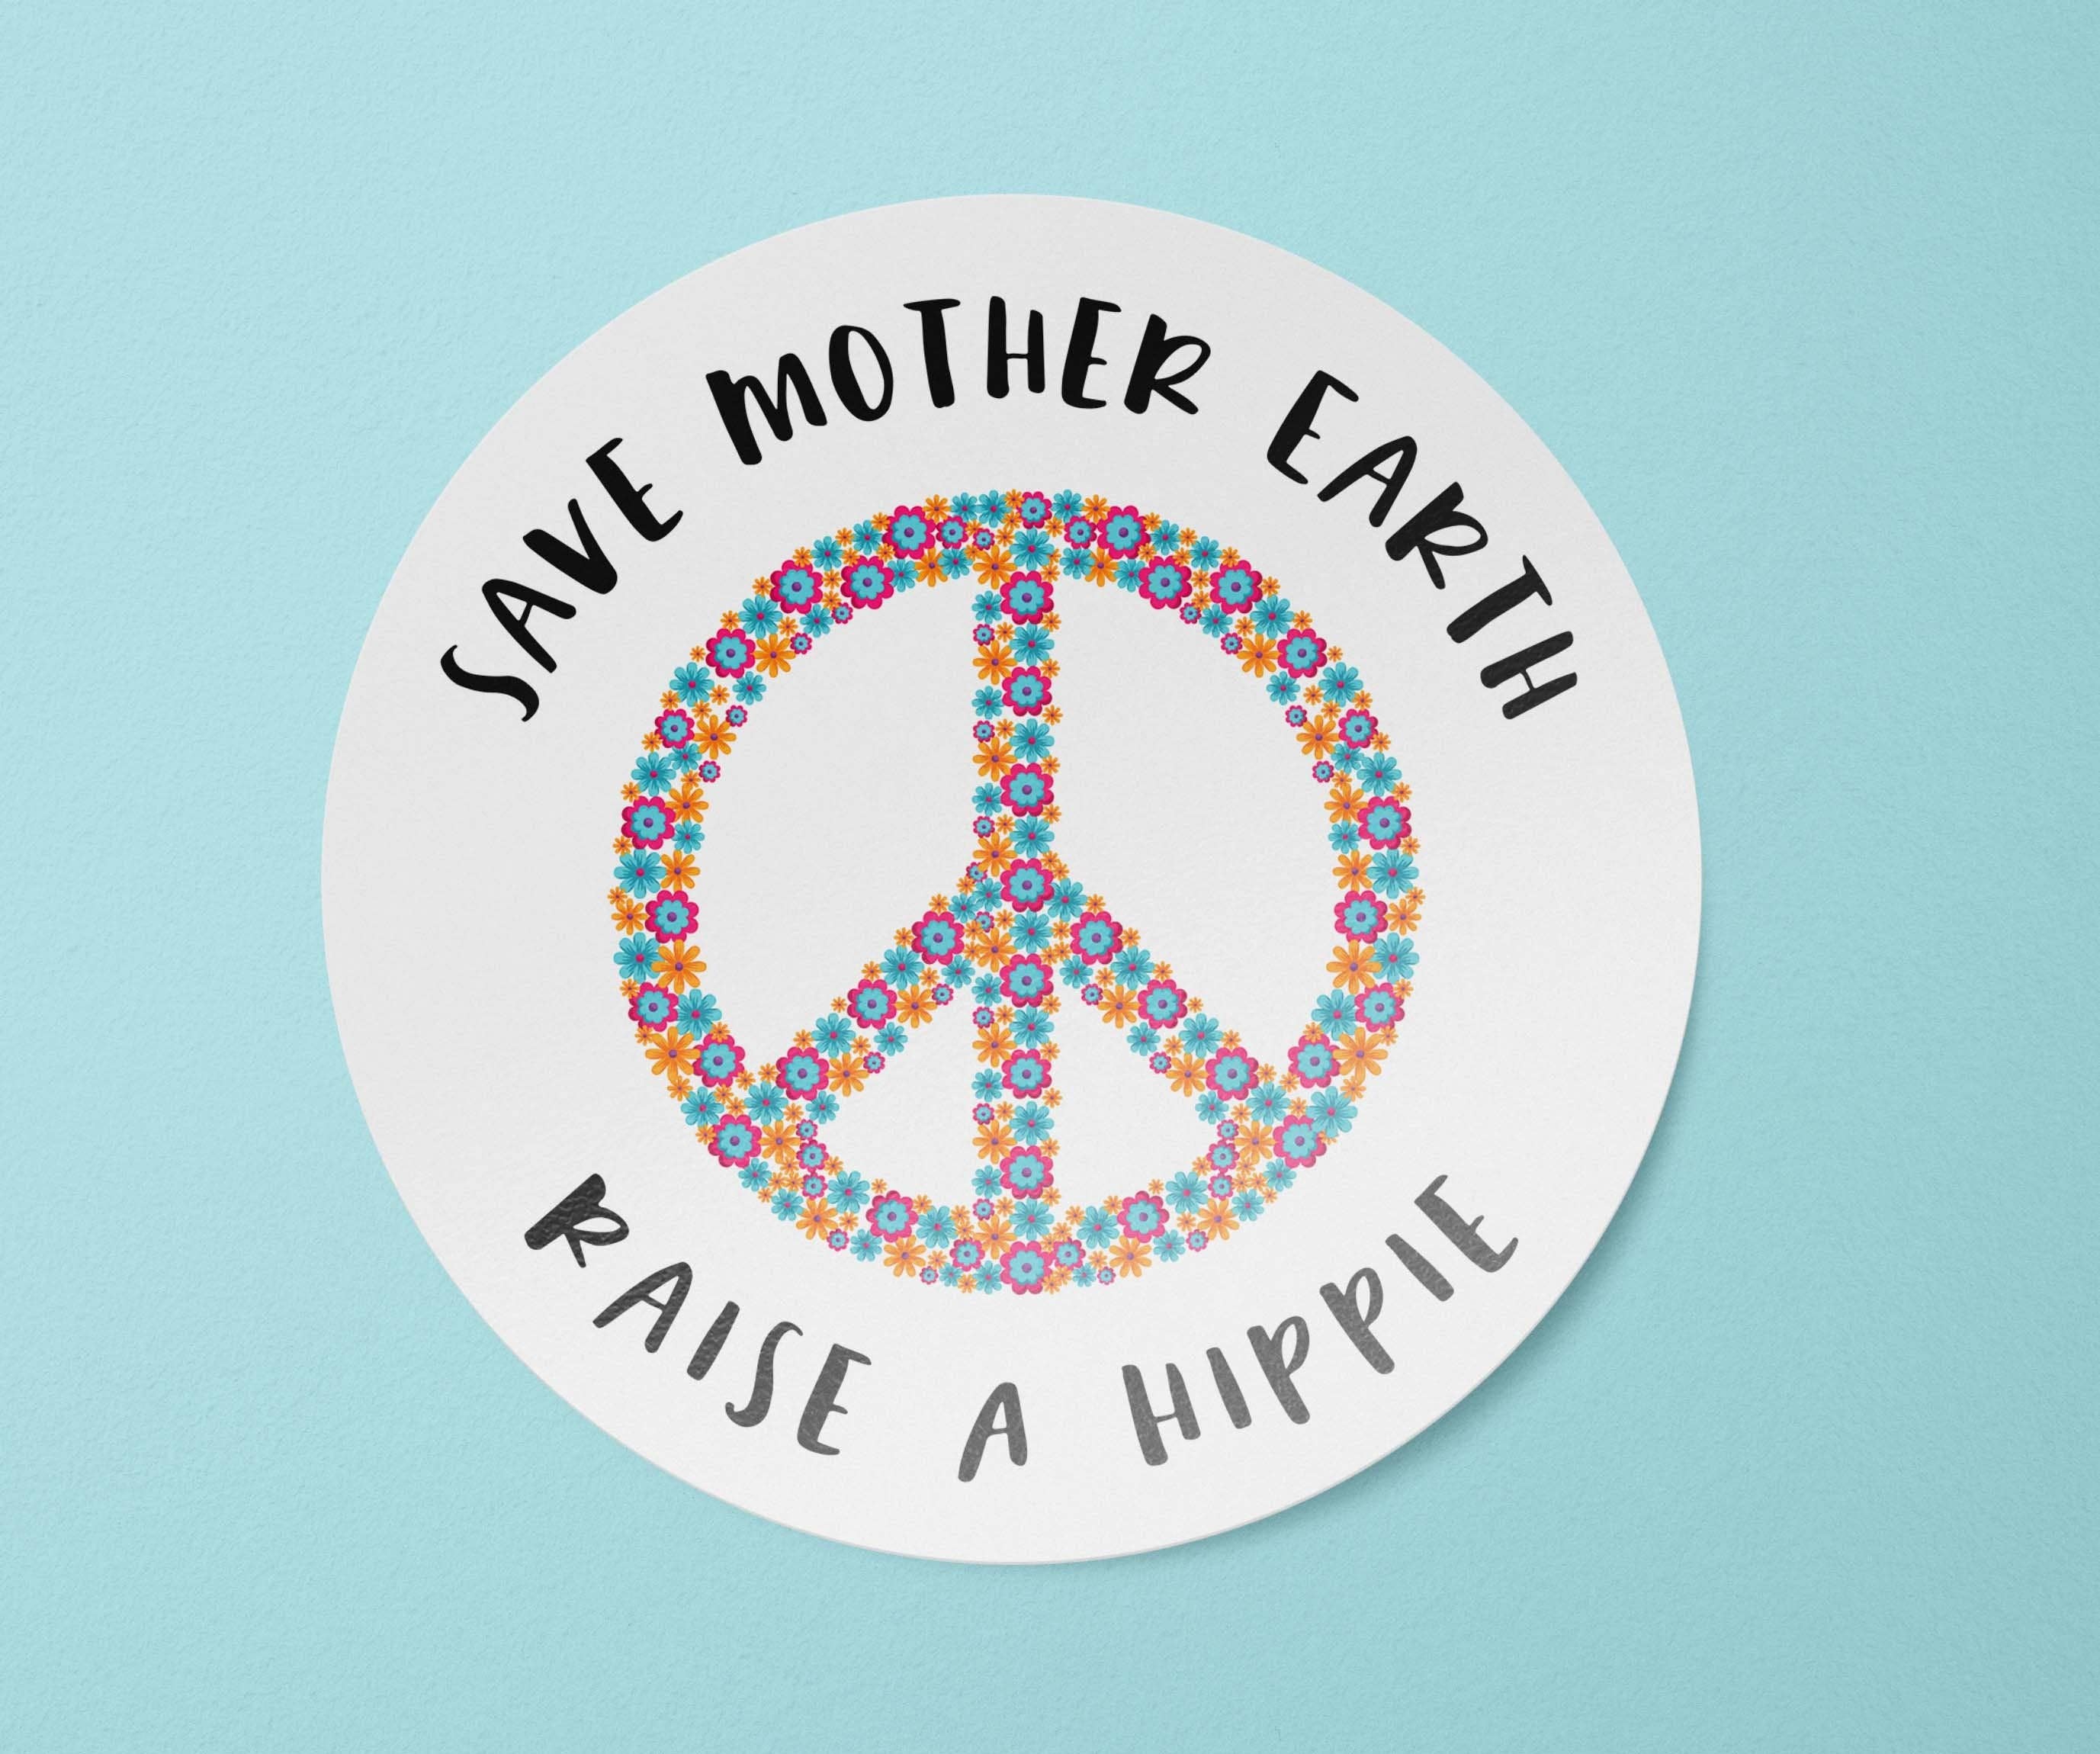 NEW Vintage Earth Day Share The Care Peace Love 1990 Hippie Window Sticker Decal 